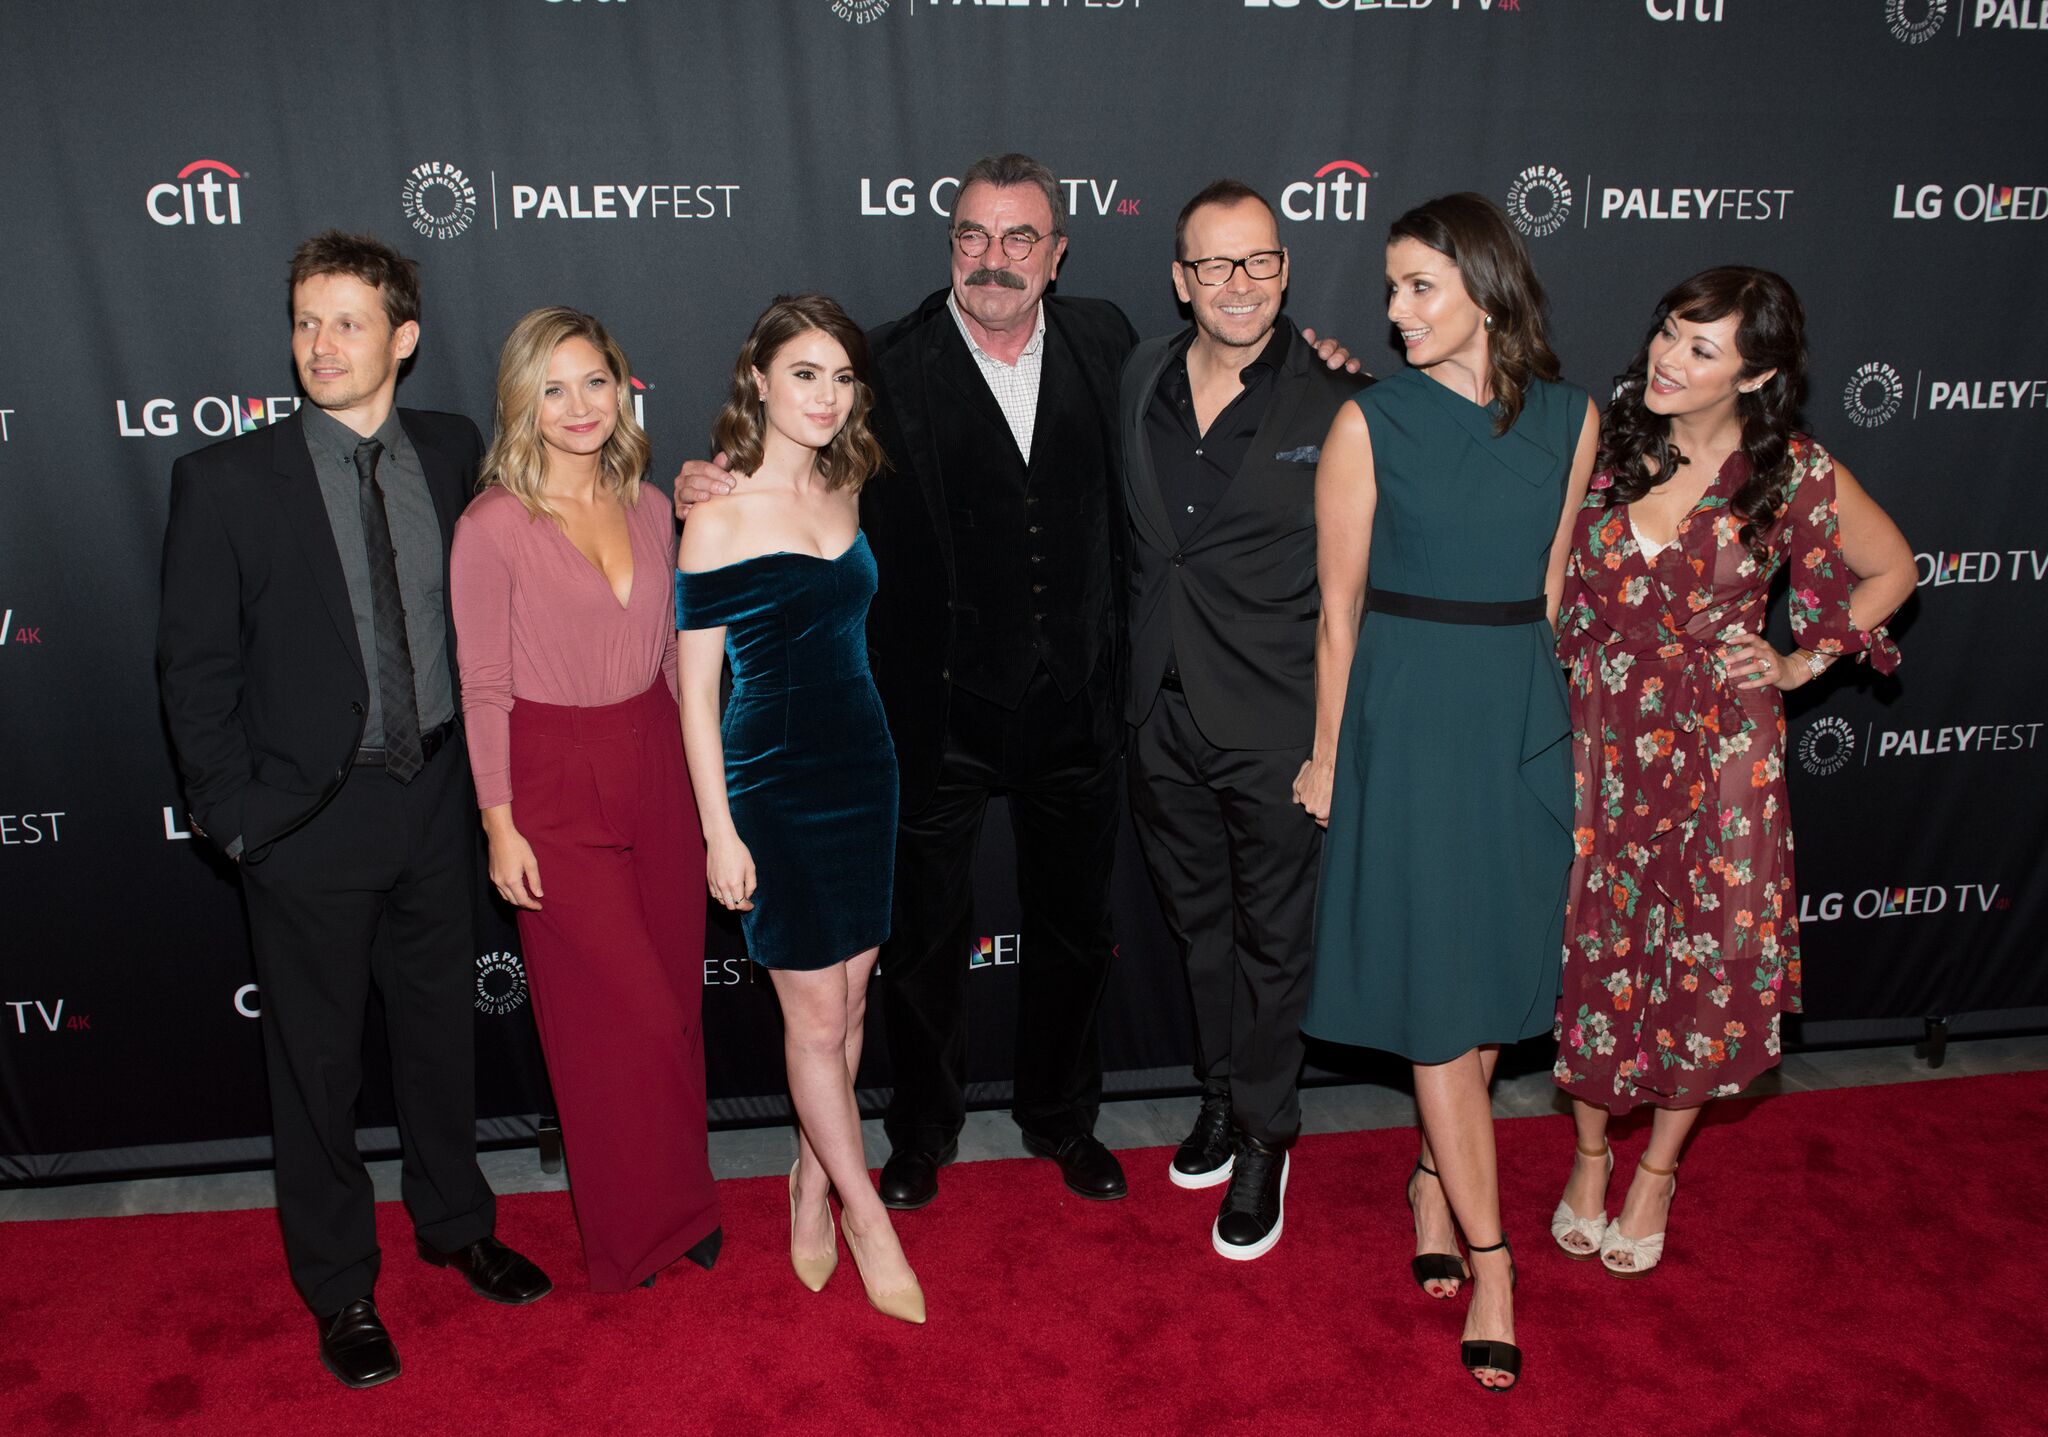 The cast attends the "Blue Bloods" Screening | Getty Images